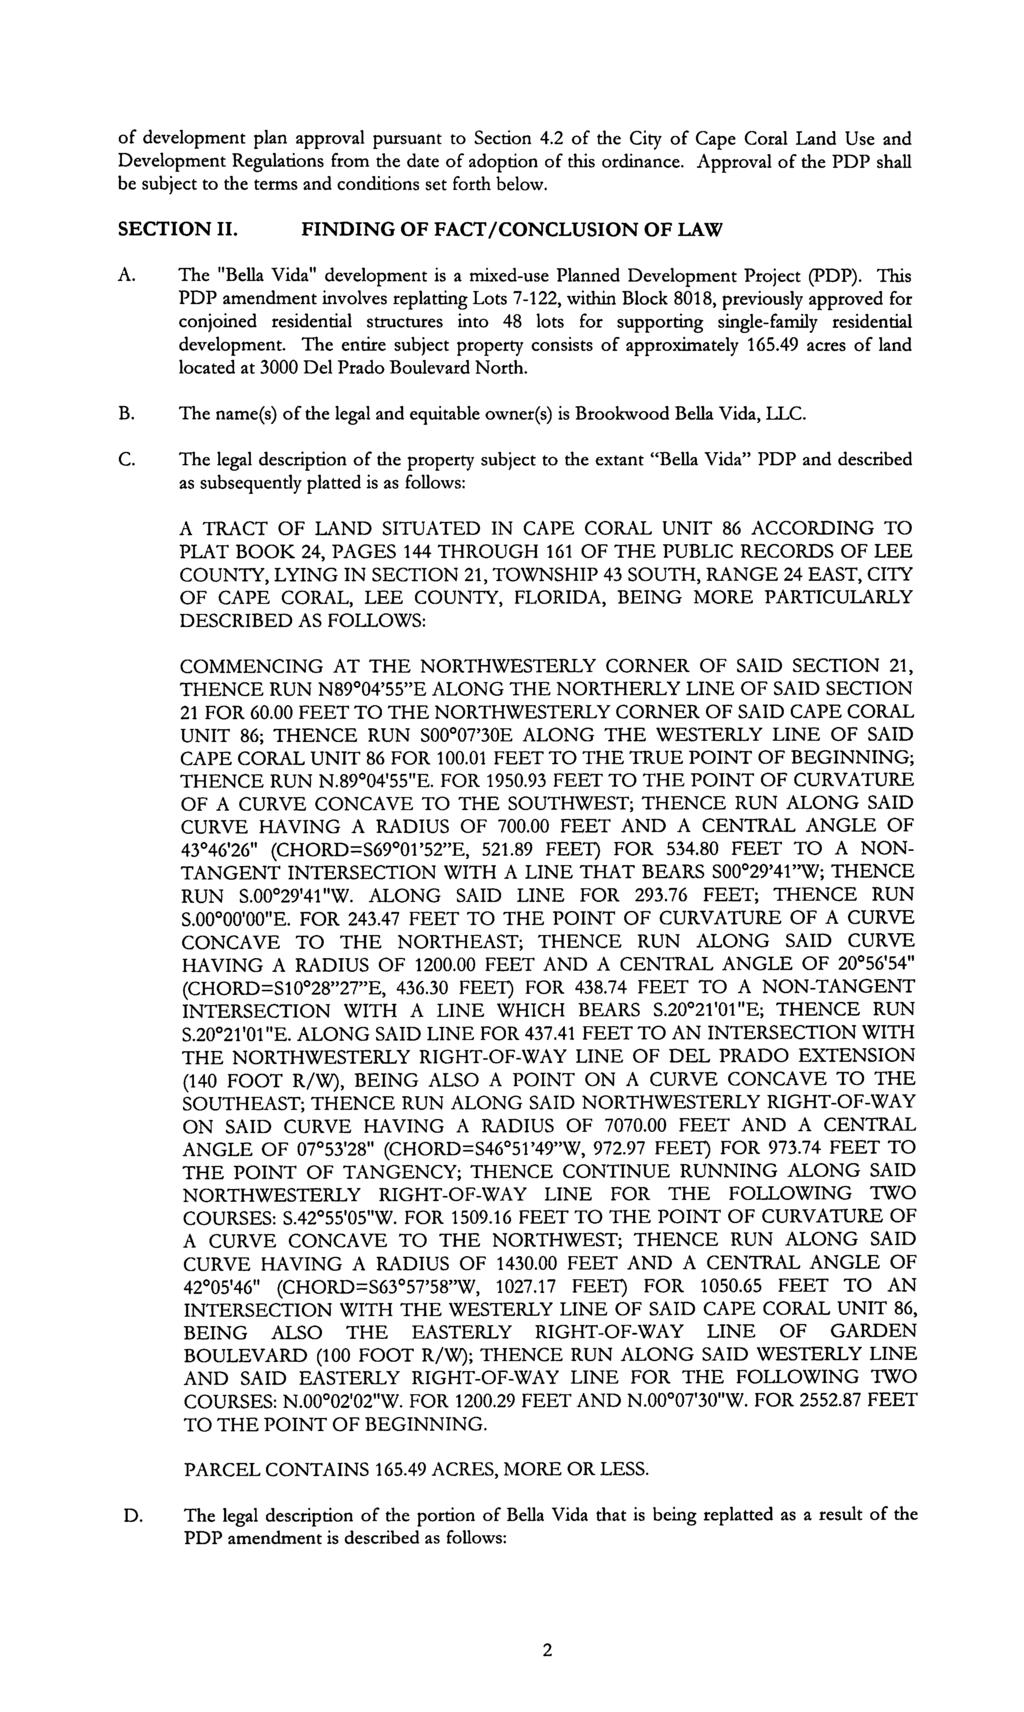 of development plan approval pursuant to Section 4.2 of the City of Cape Coral Land Use and Development Regulations from the date of adoption of this ordinance.